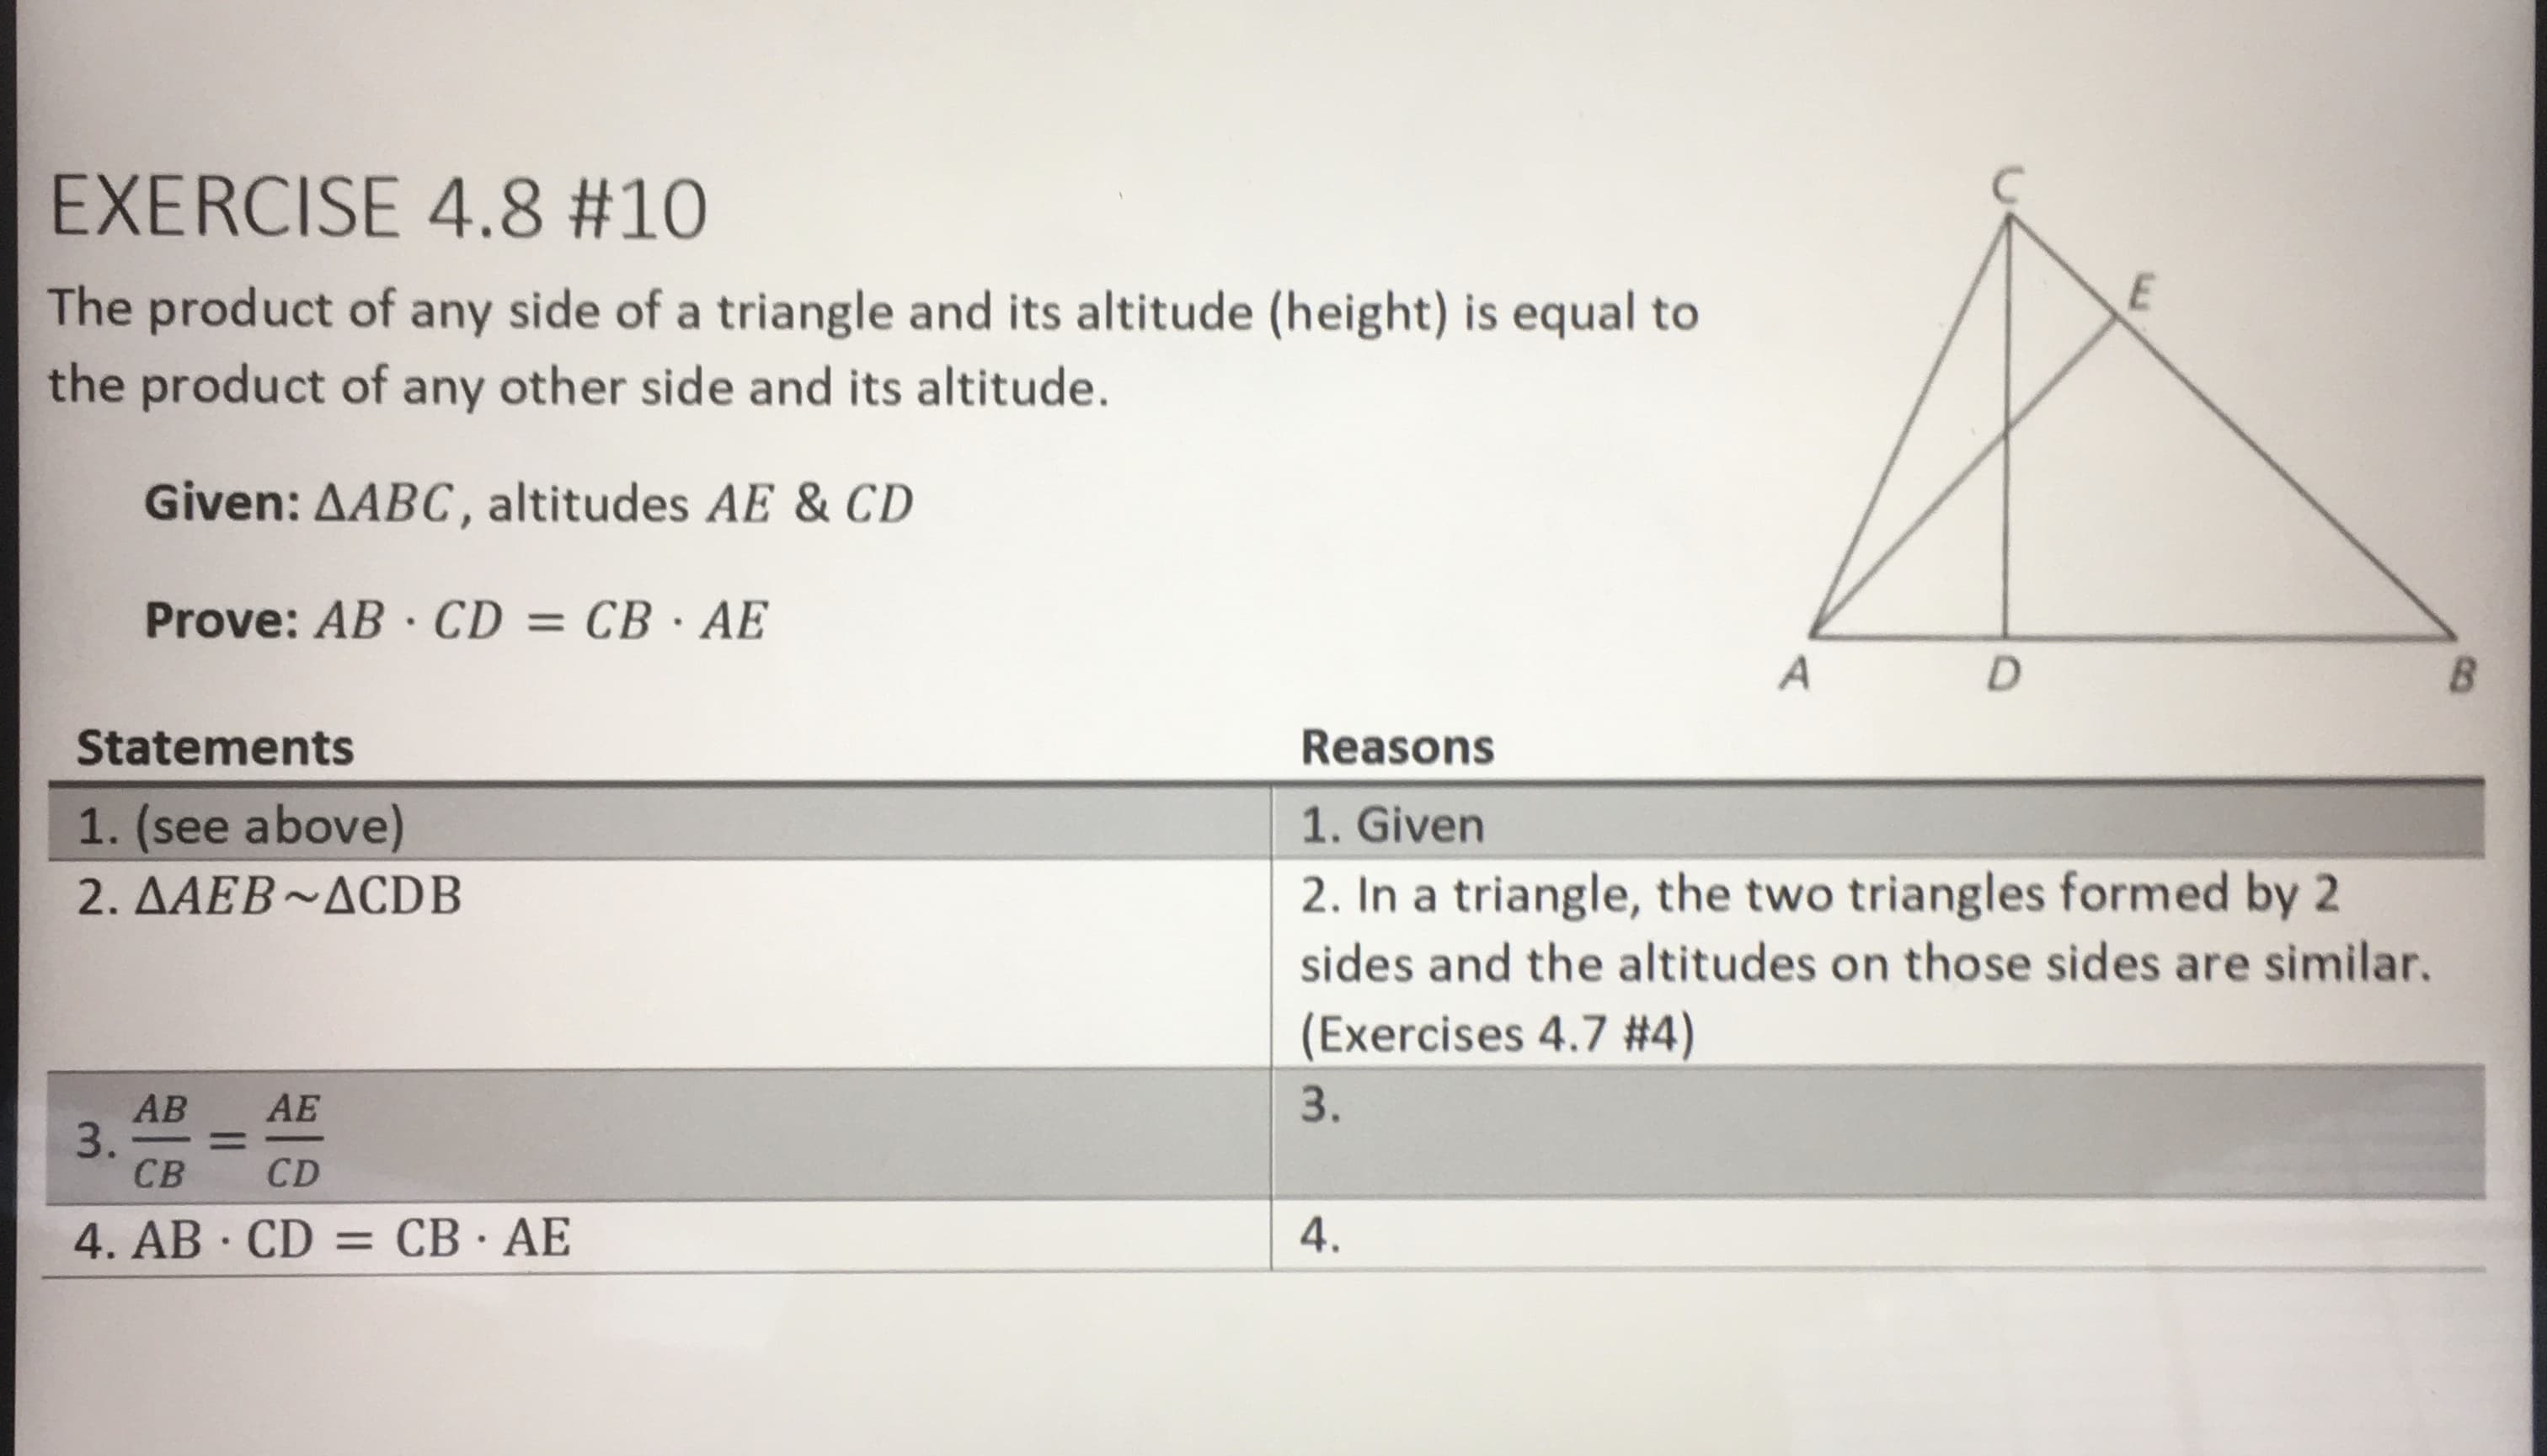 EXERCISE 4.8 #10
The product of any side of a triangle and its altitude (height) is equal to
the product of any other side and its altitude.
Given: AABC, altitudes AE & CD
Prove: AB · CD = CB · AE
B.
Statements
Reasons
1. (see above)
1. Given
2. In a triangle, the two triangles formed by 2
sides and the altitudes on those sides are similar.
2. AAEB~ACDB
(Exercises 4.7 #4)
3.
AB
3.
CB
AE
%3D
CD
4. AB · CD = CB · AE
4.
